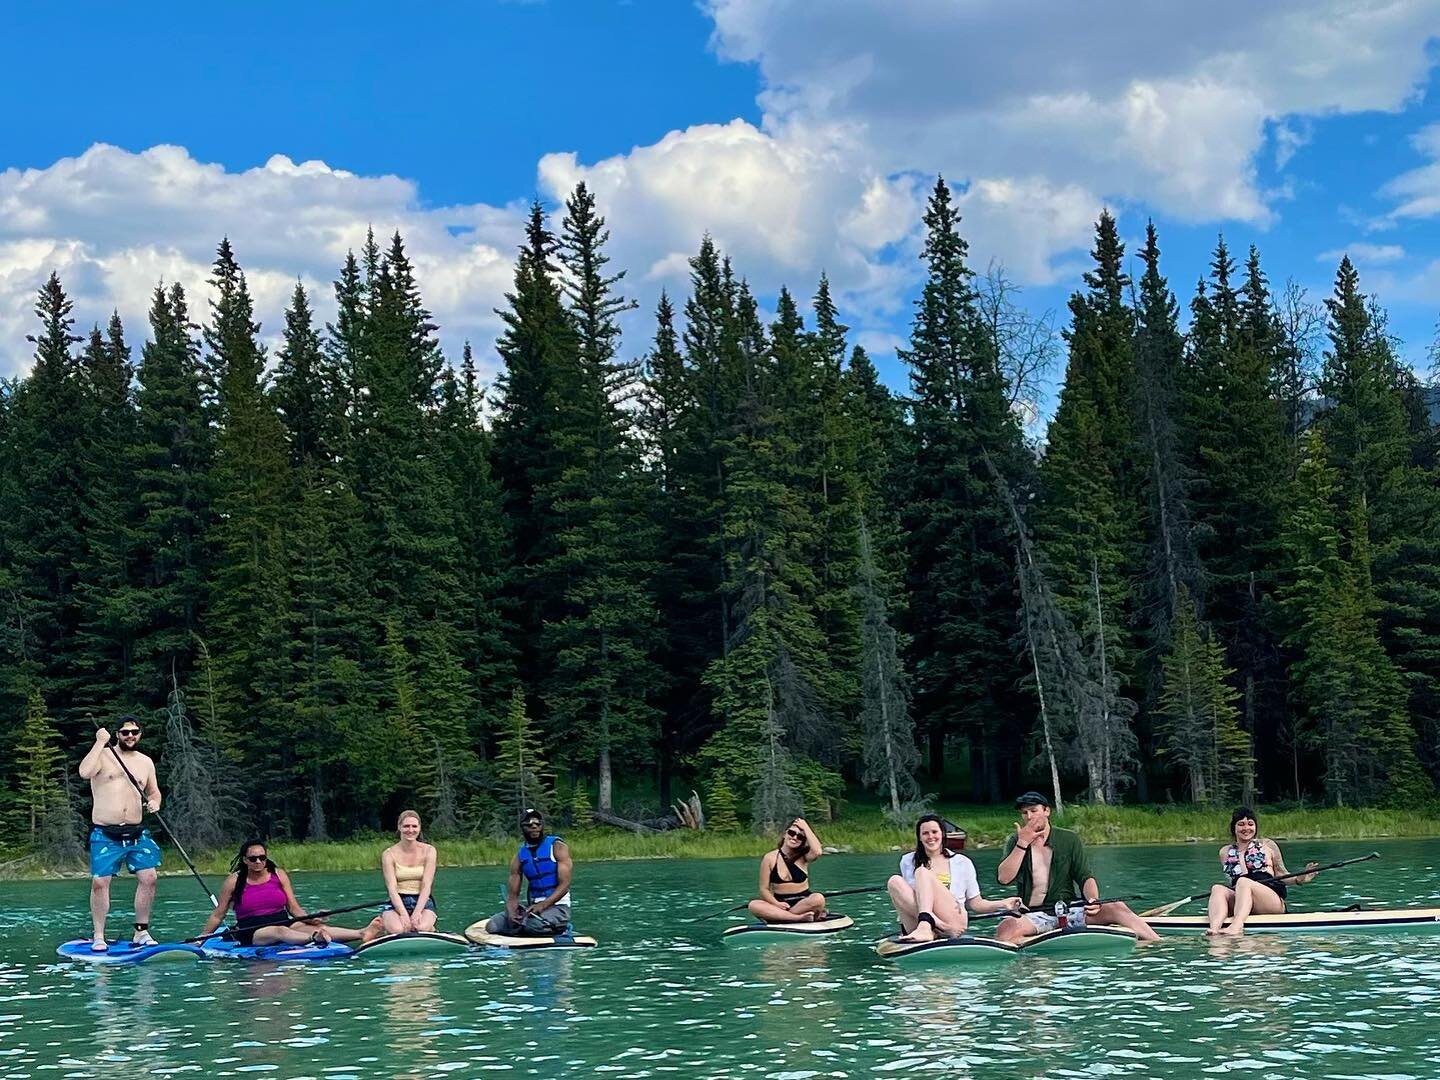 How did you spend the past few sunny days? ☀️😎

Big thanks to @translucid_adventures for hosting our staff paddle this evening! 

We sure do love this place! 💙